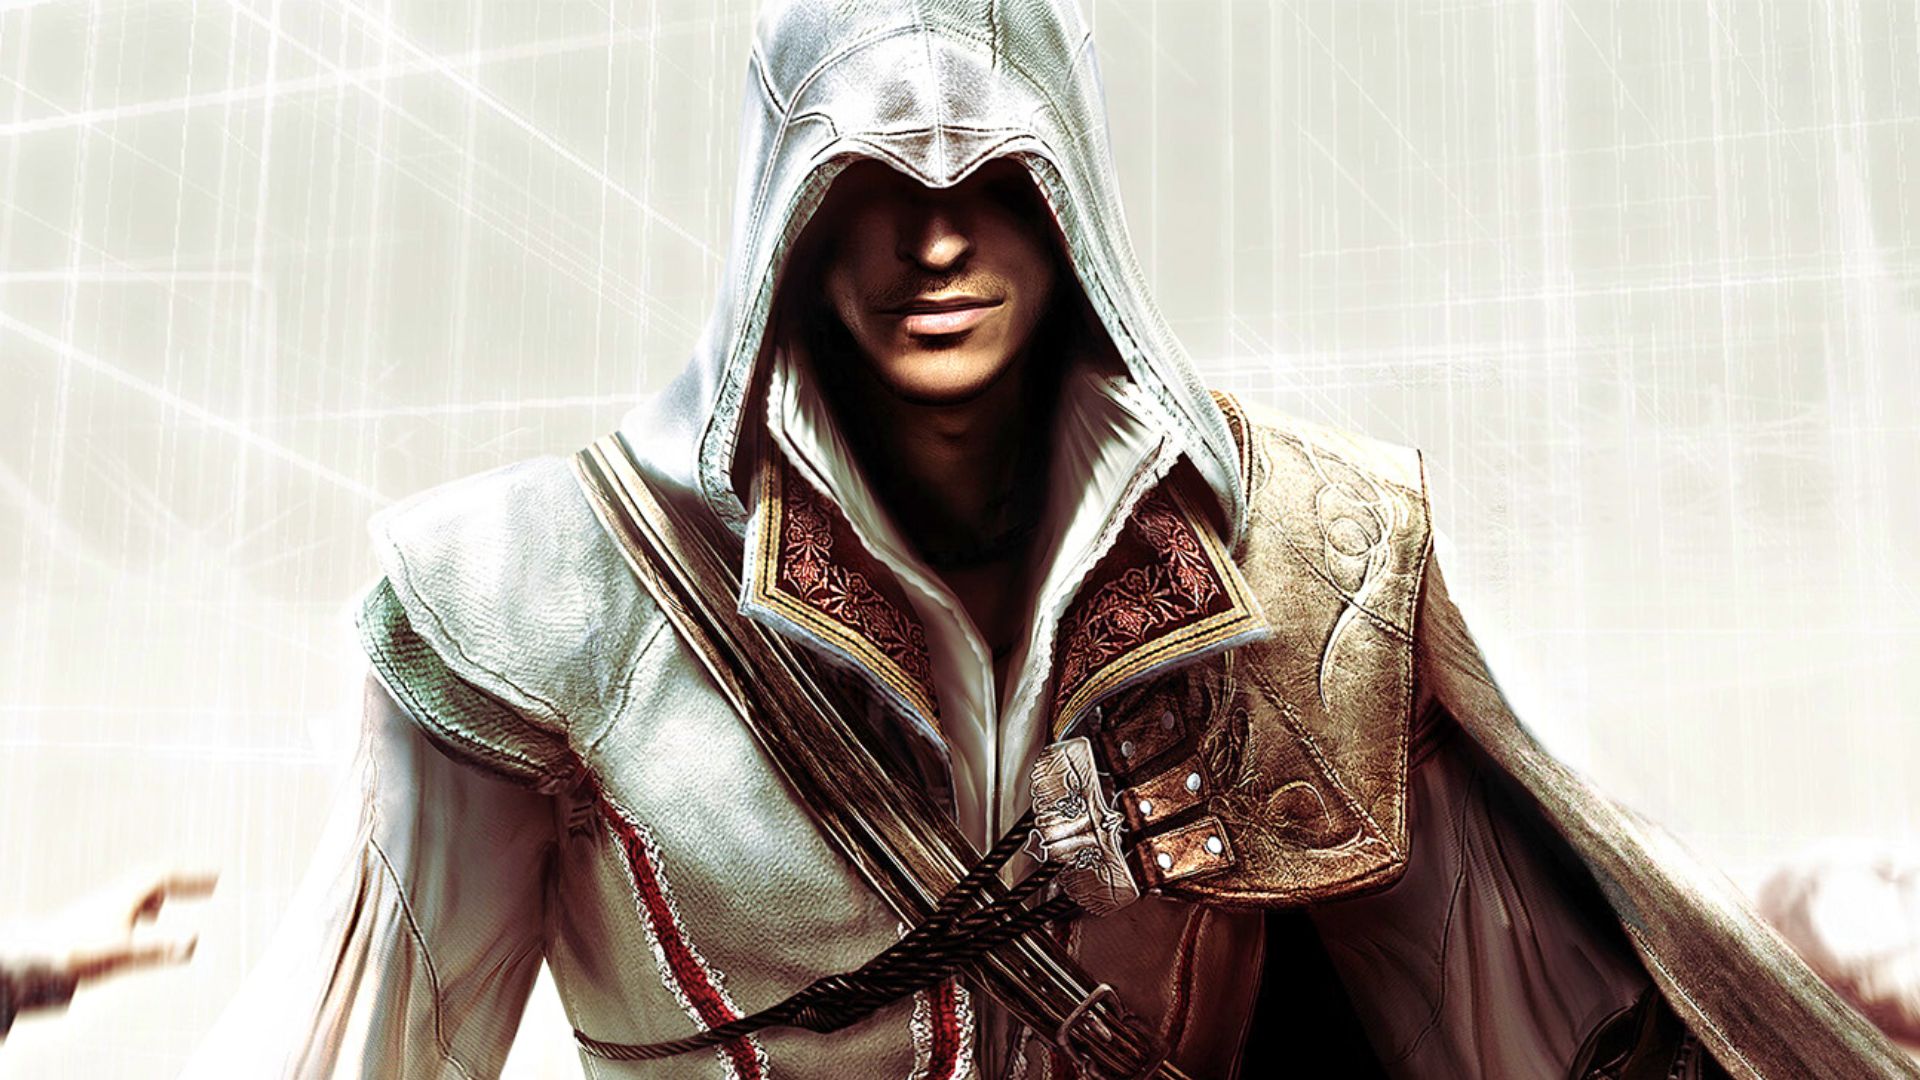 Assassin's Creed Nexus may bring back our favorite characters